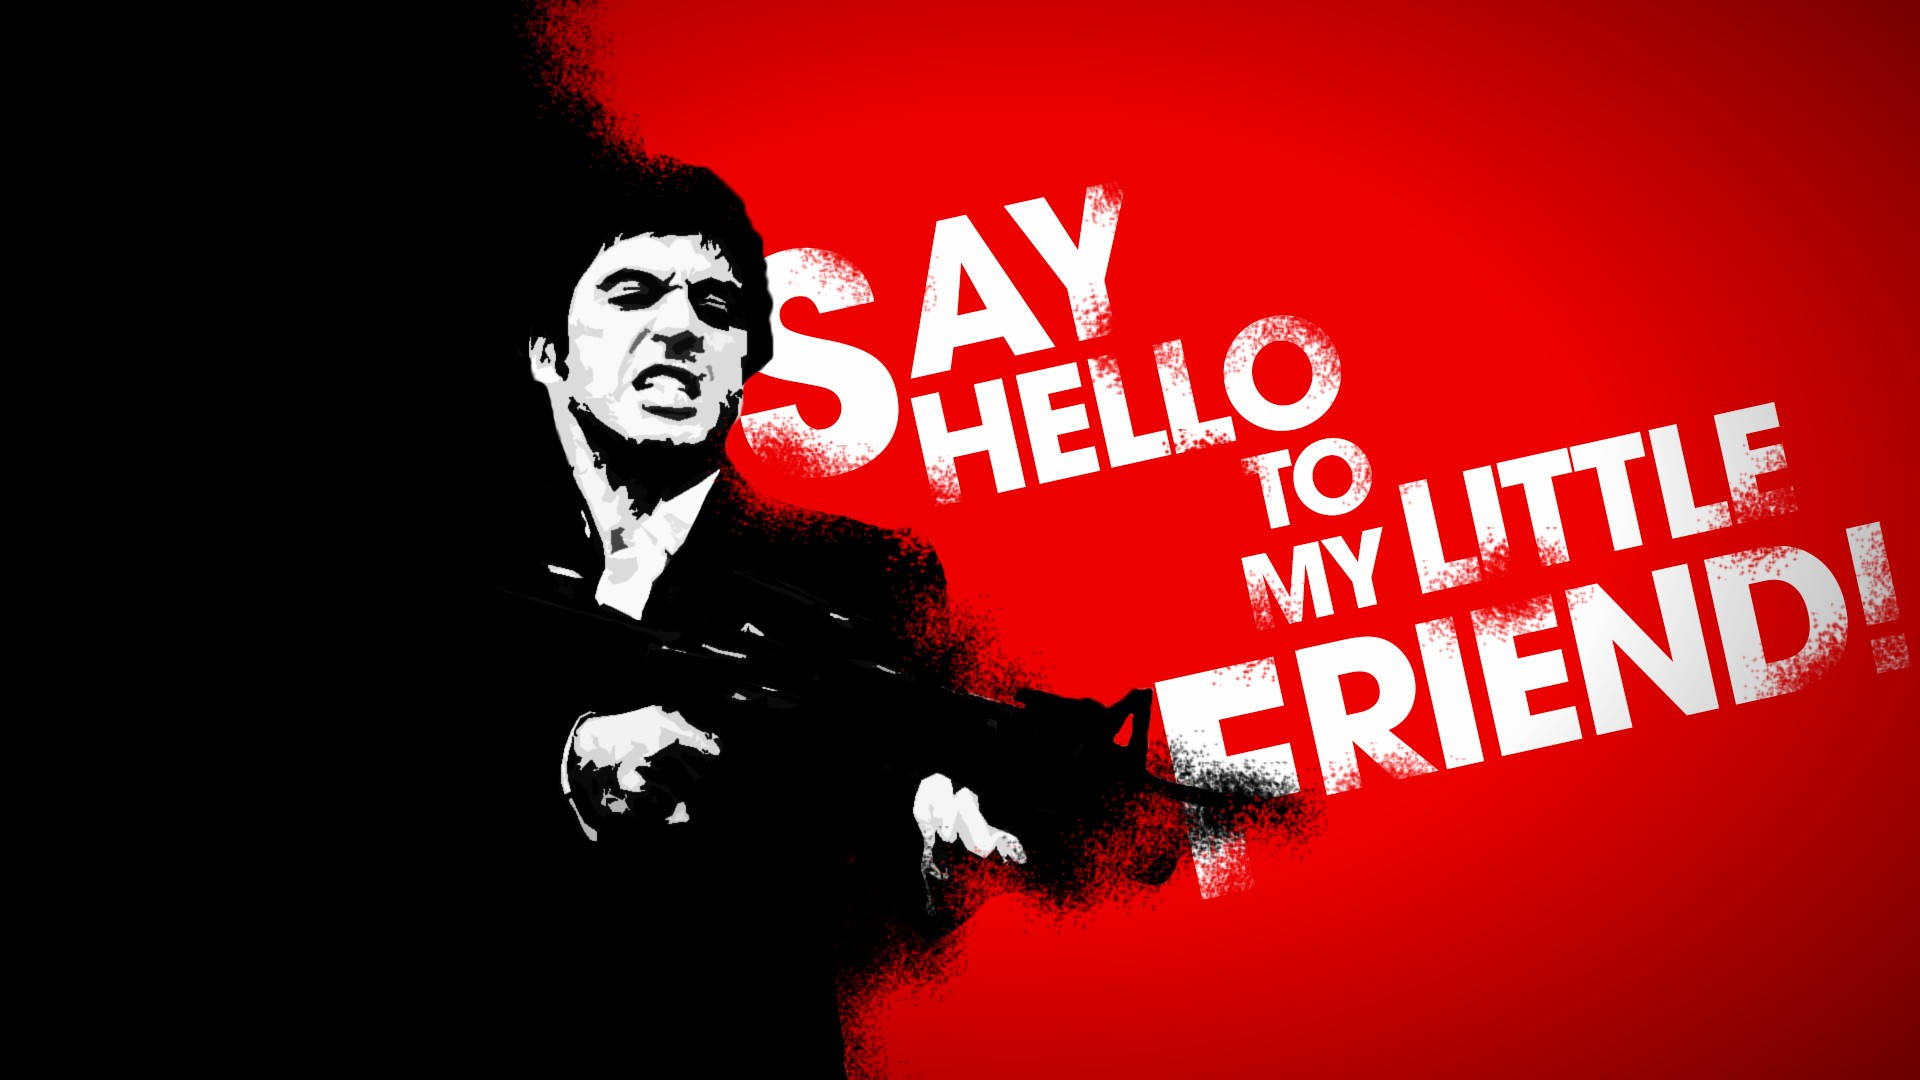 Al Pacino Scarface Red And Black Background